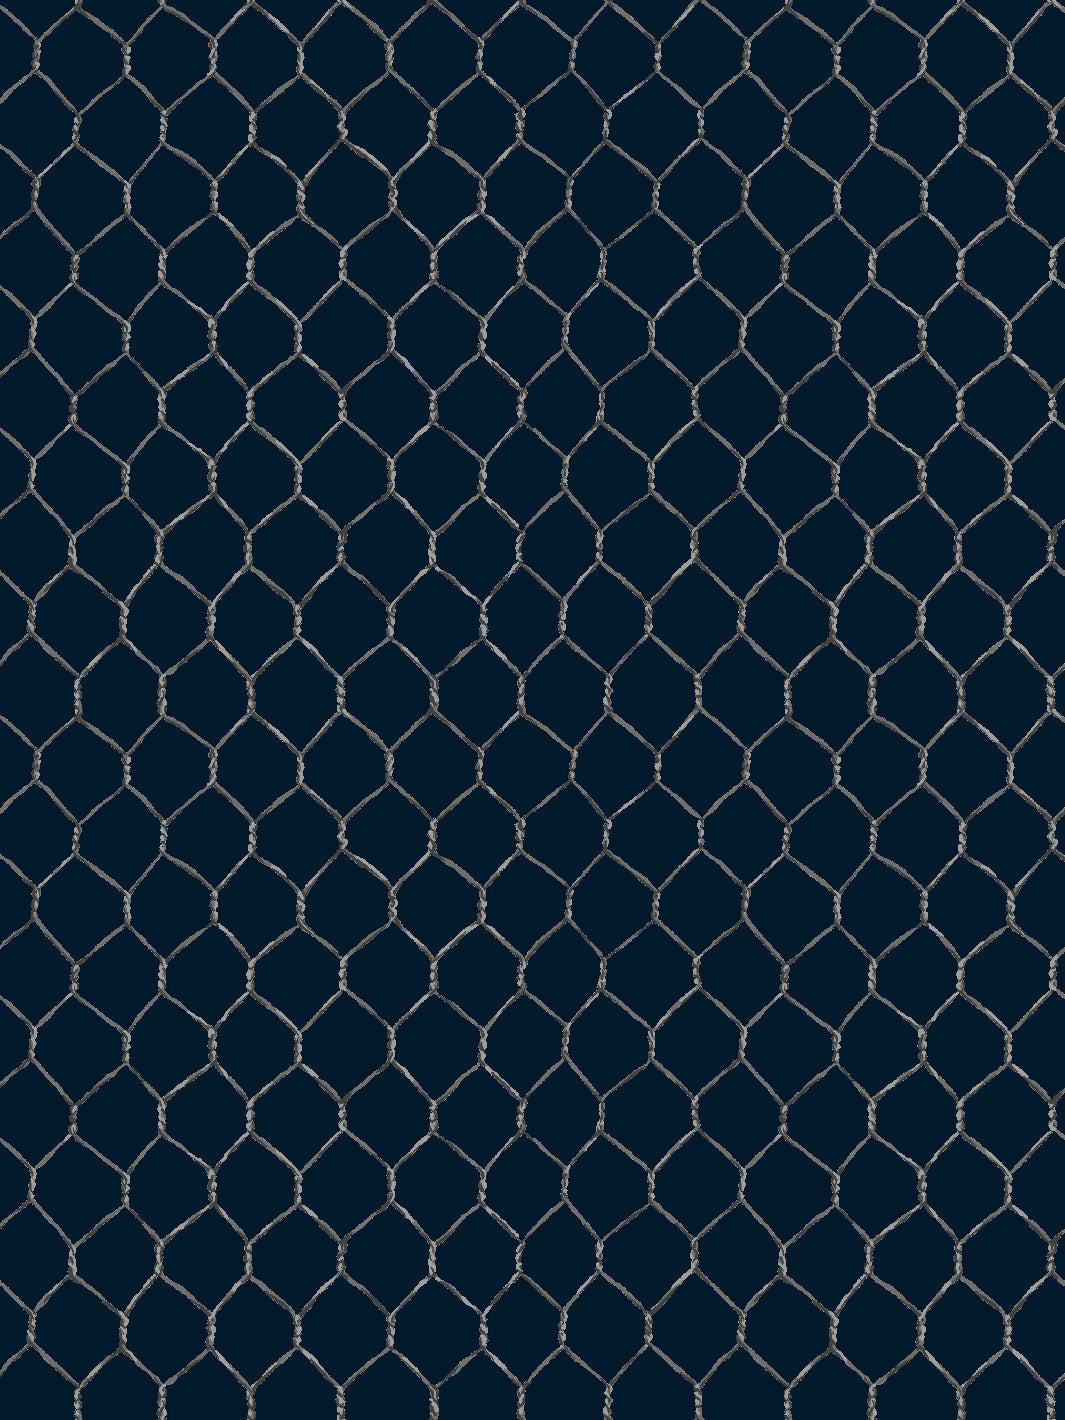 'Evelyn's Chicken Wire' Wallpaper by Sarah Jessica Parker - Metal on Navy